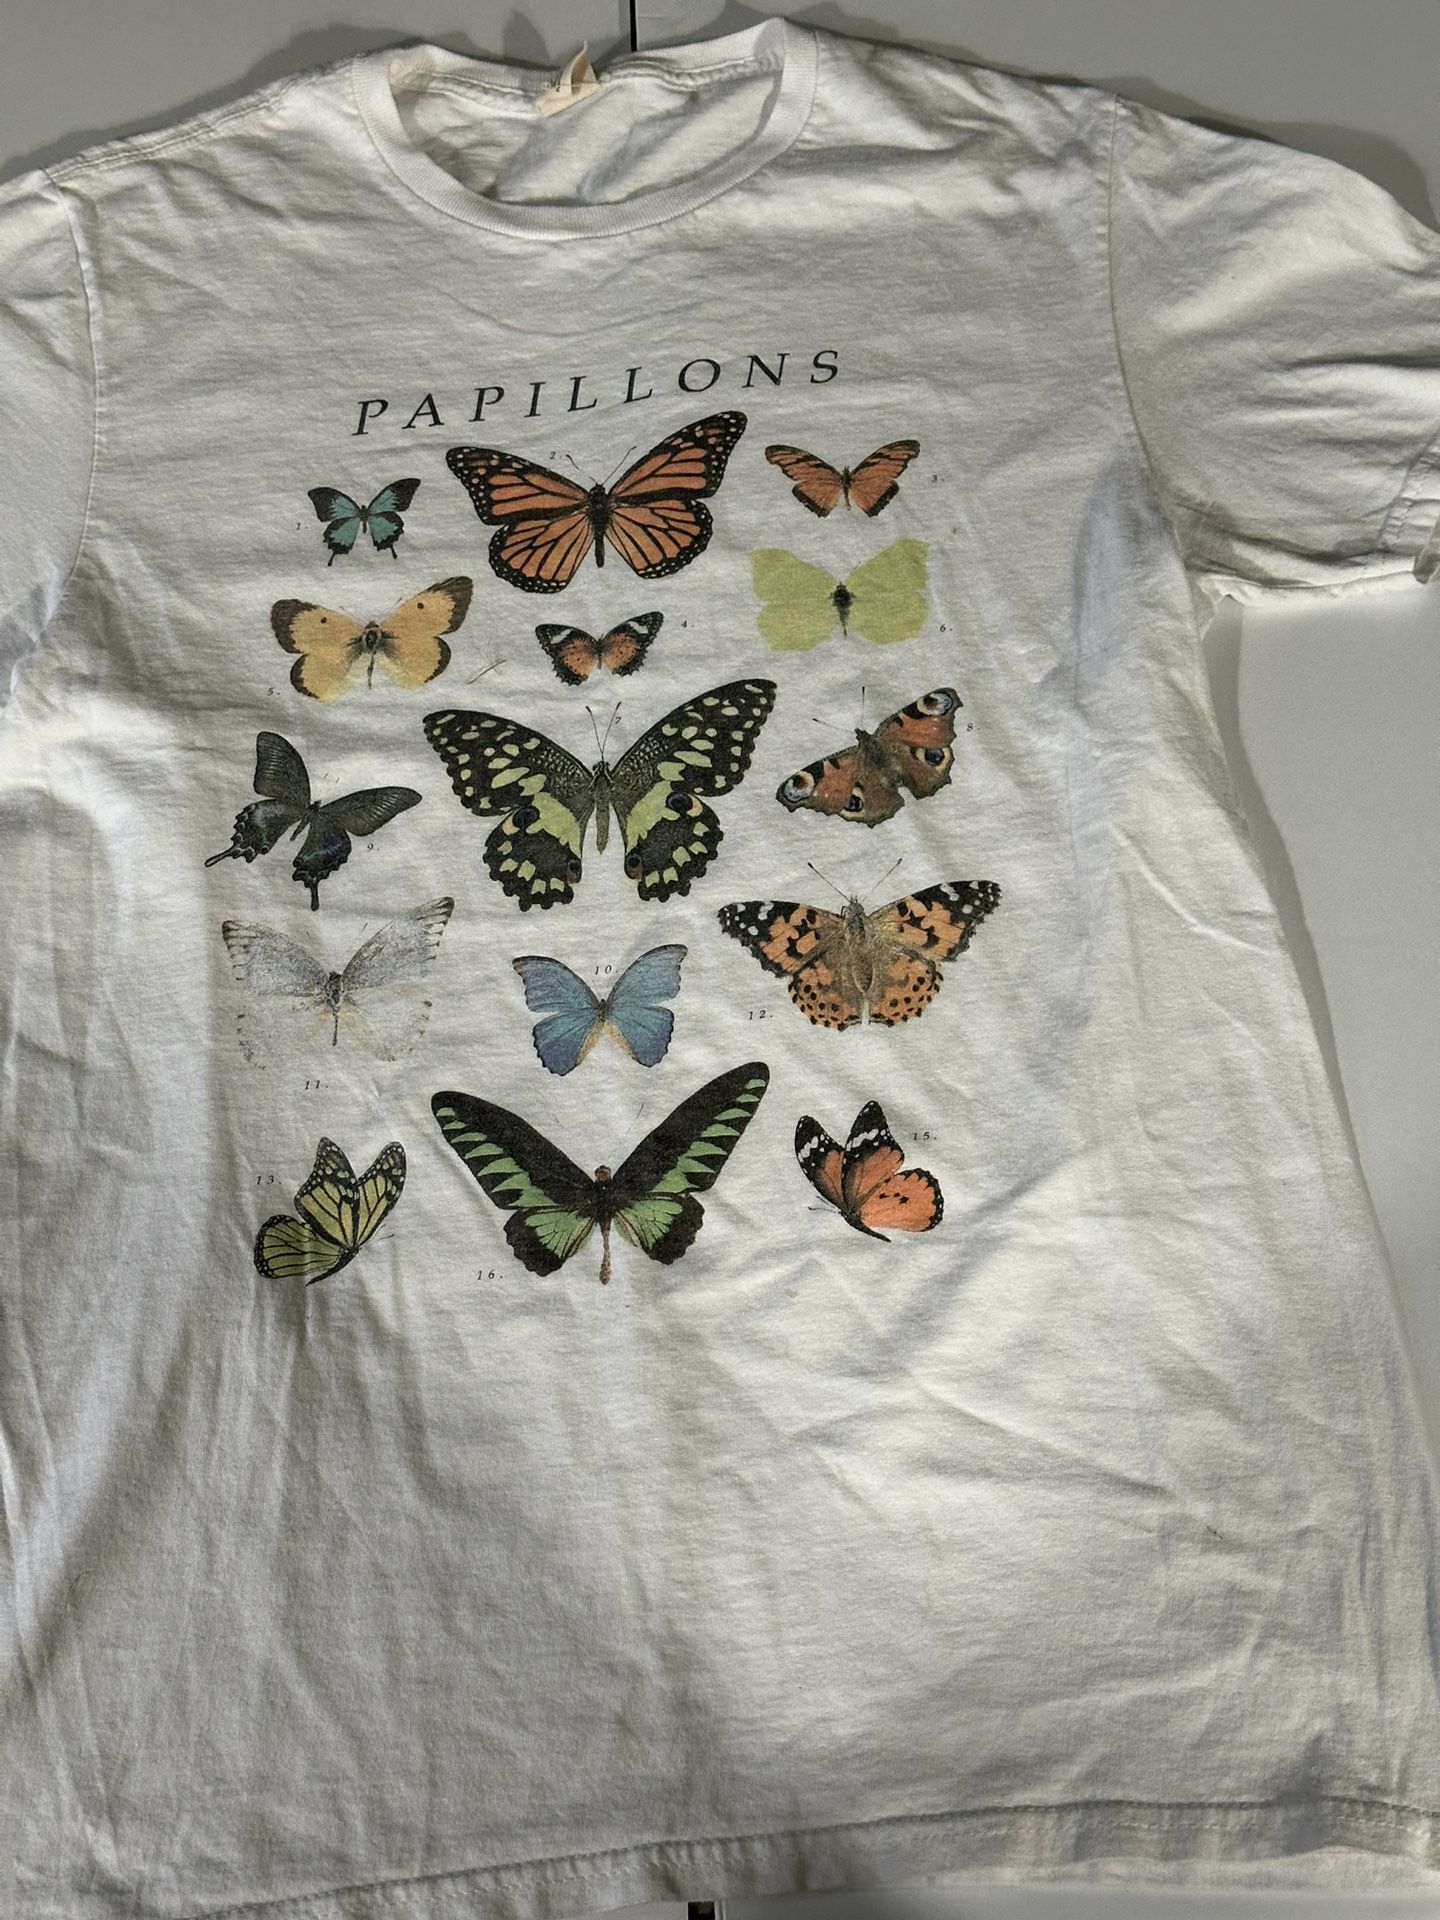  Papillons T-Shirt By Urban Outfitters Multicolored Butterflies Size S Some Wear Longer Style 